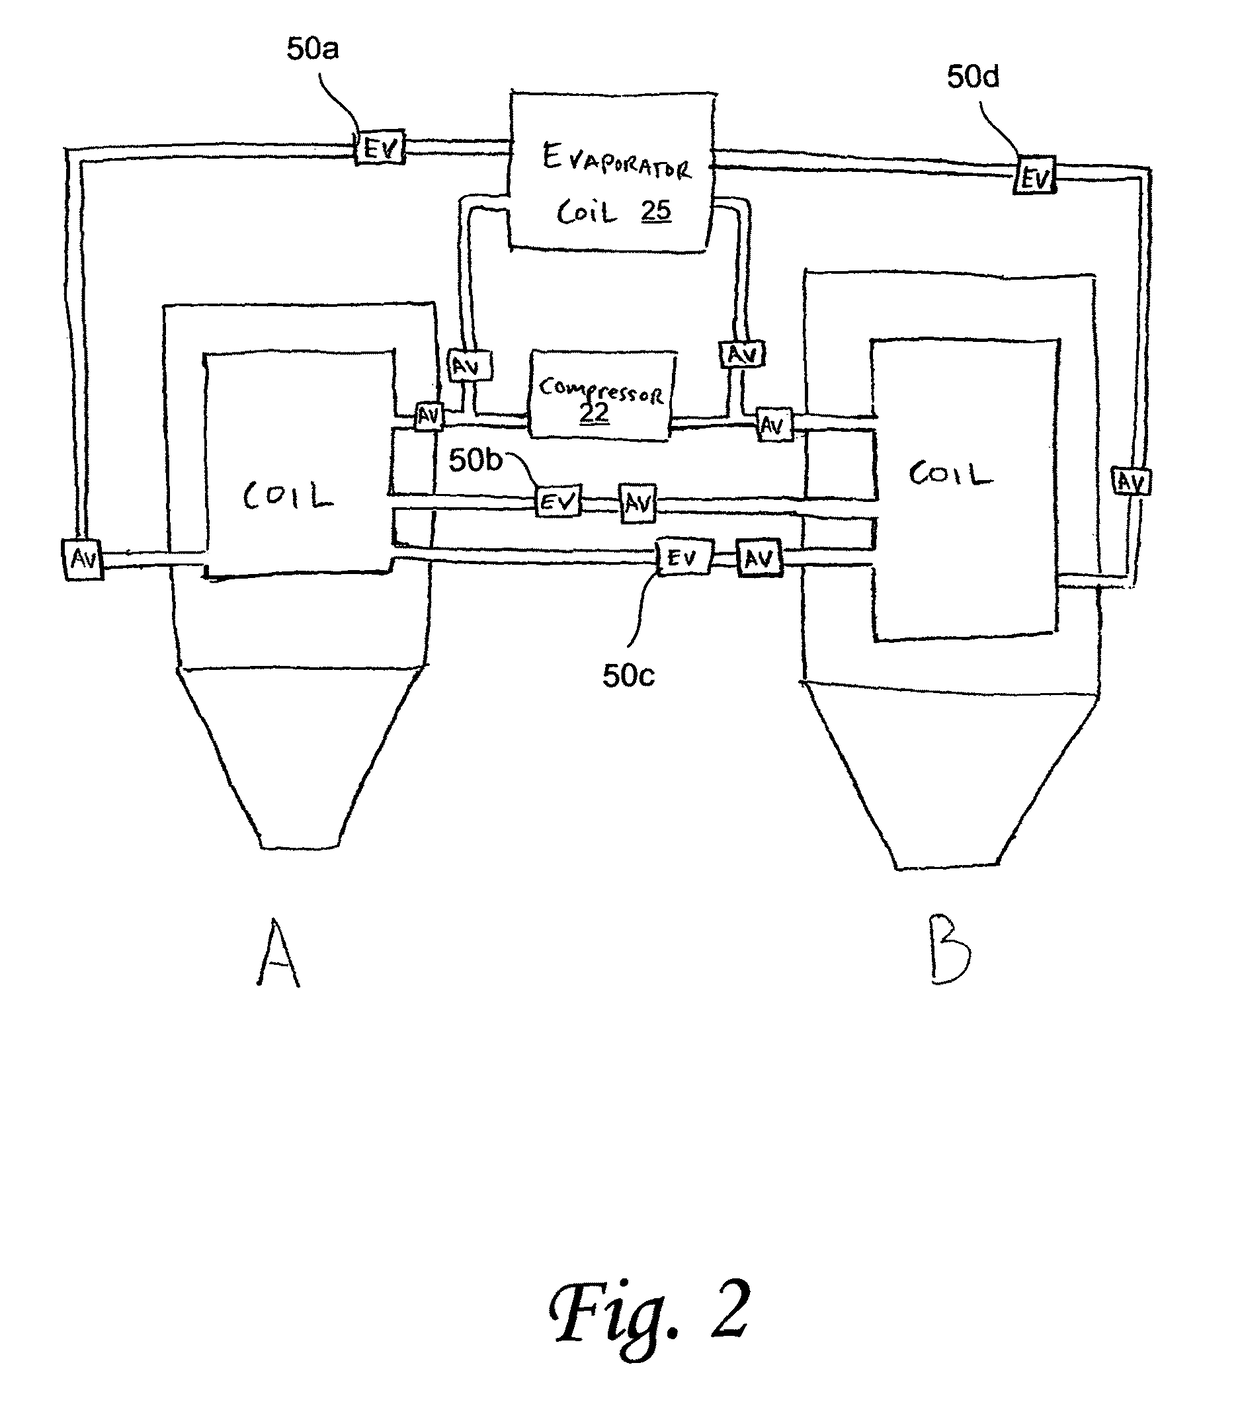 Ionic air cooling device